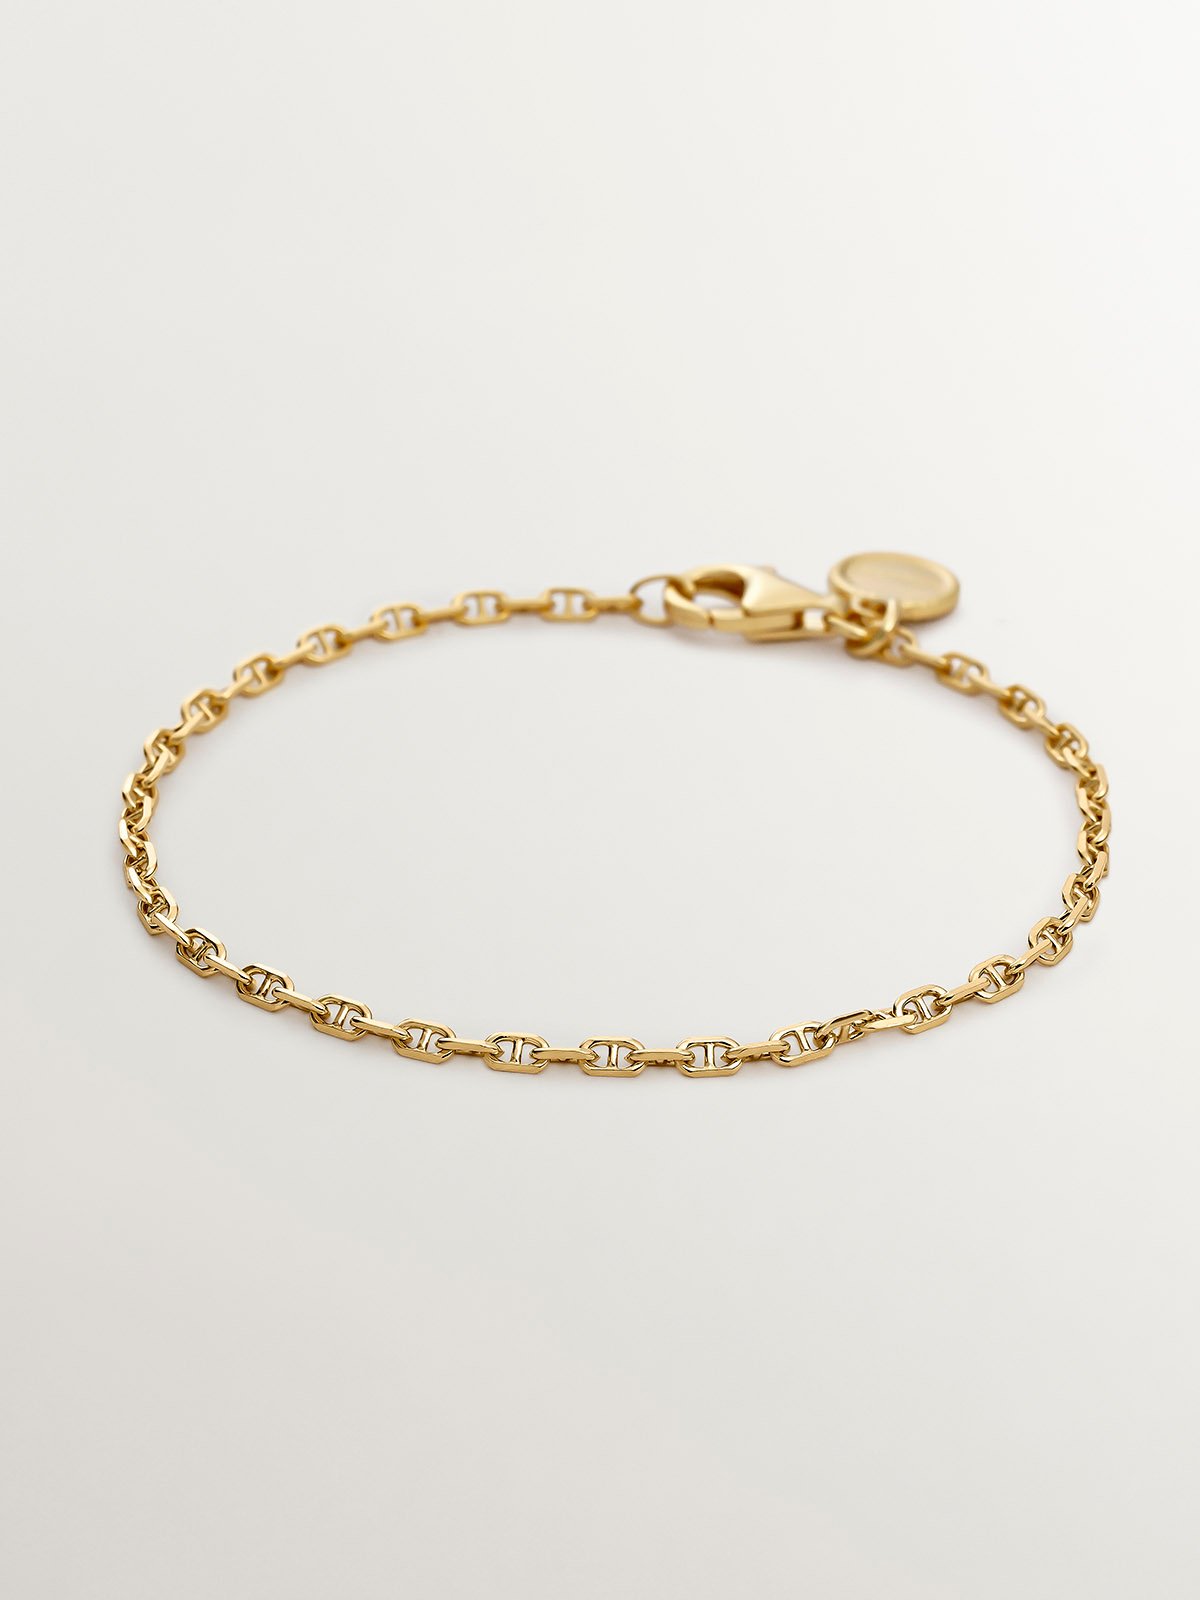 925 Silver link bracelet bathed in 18K yellow gold